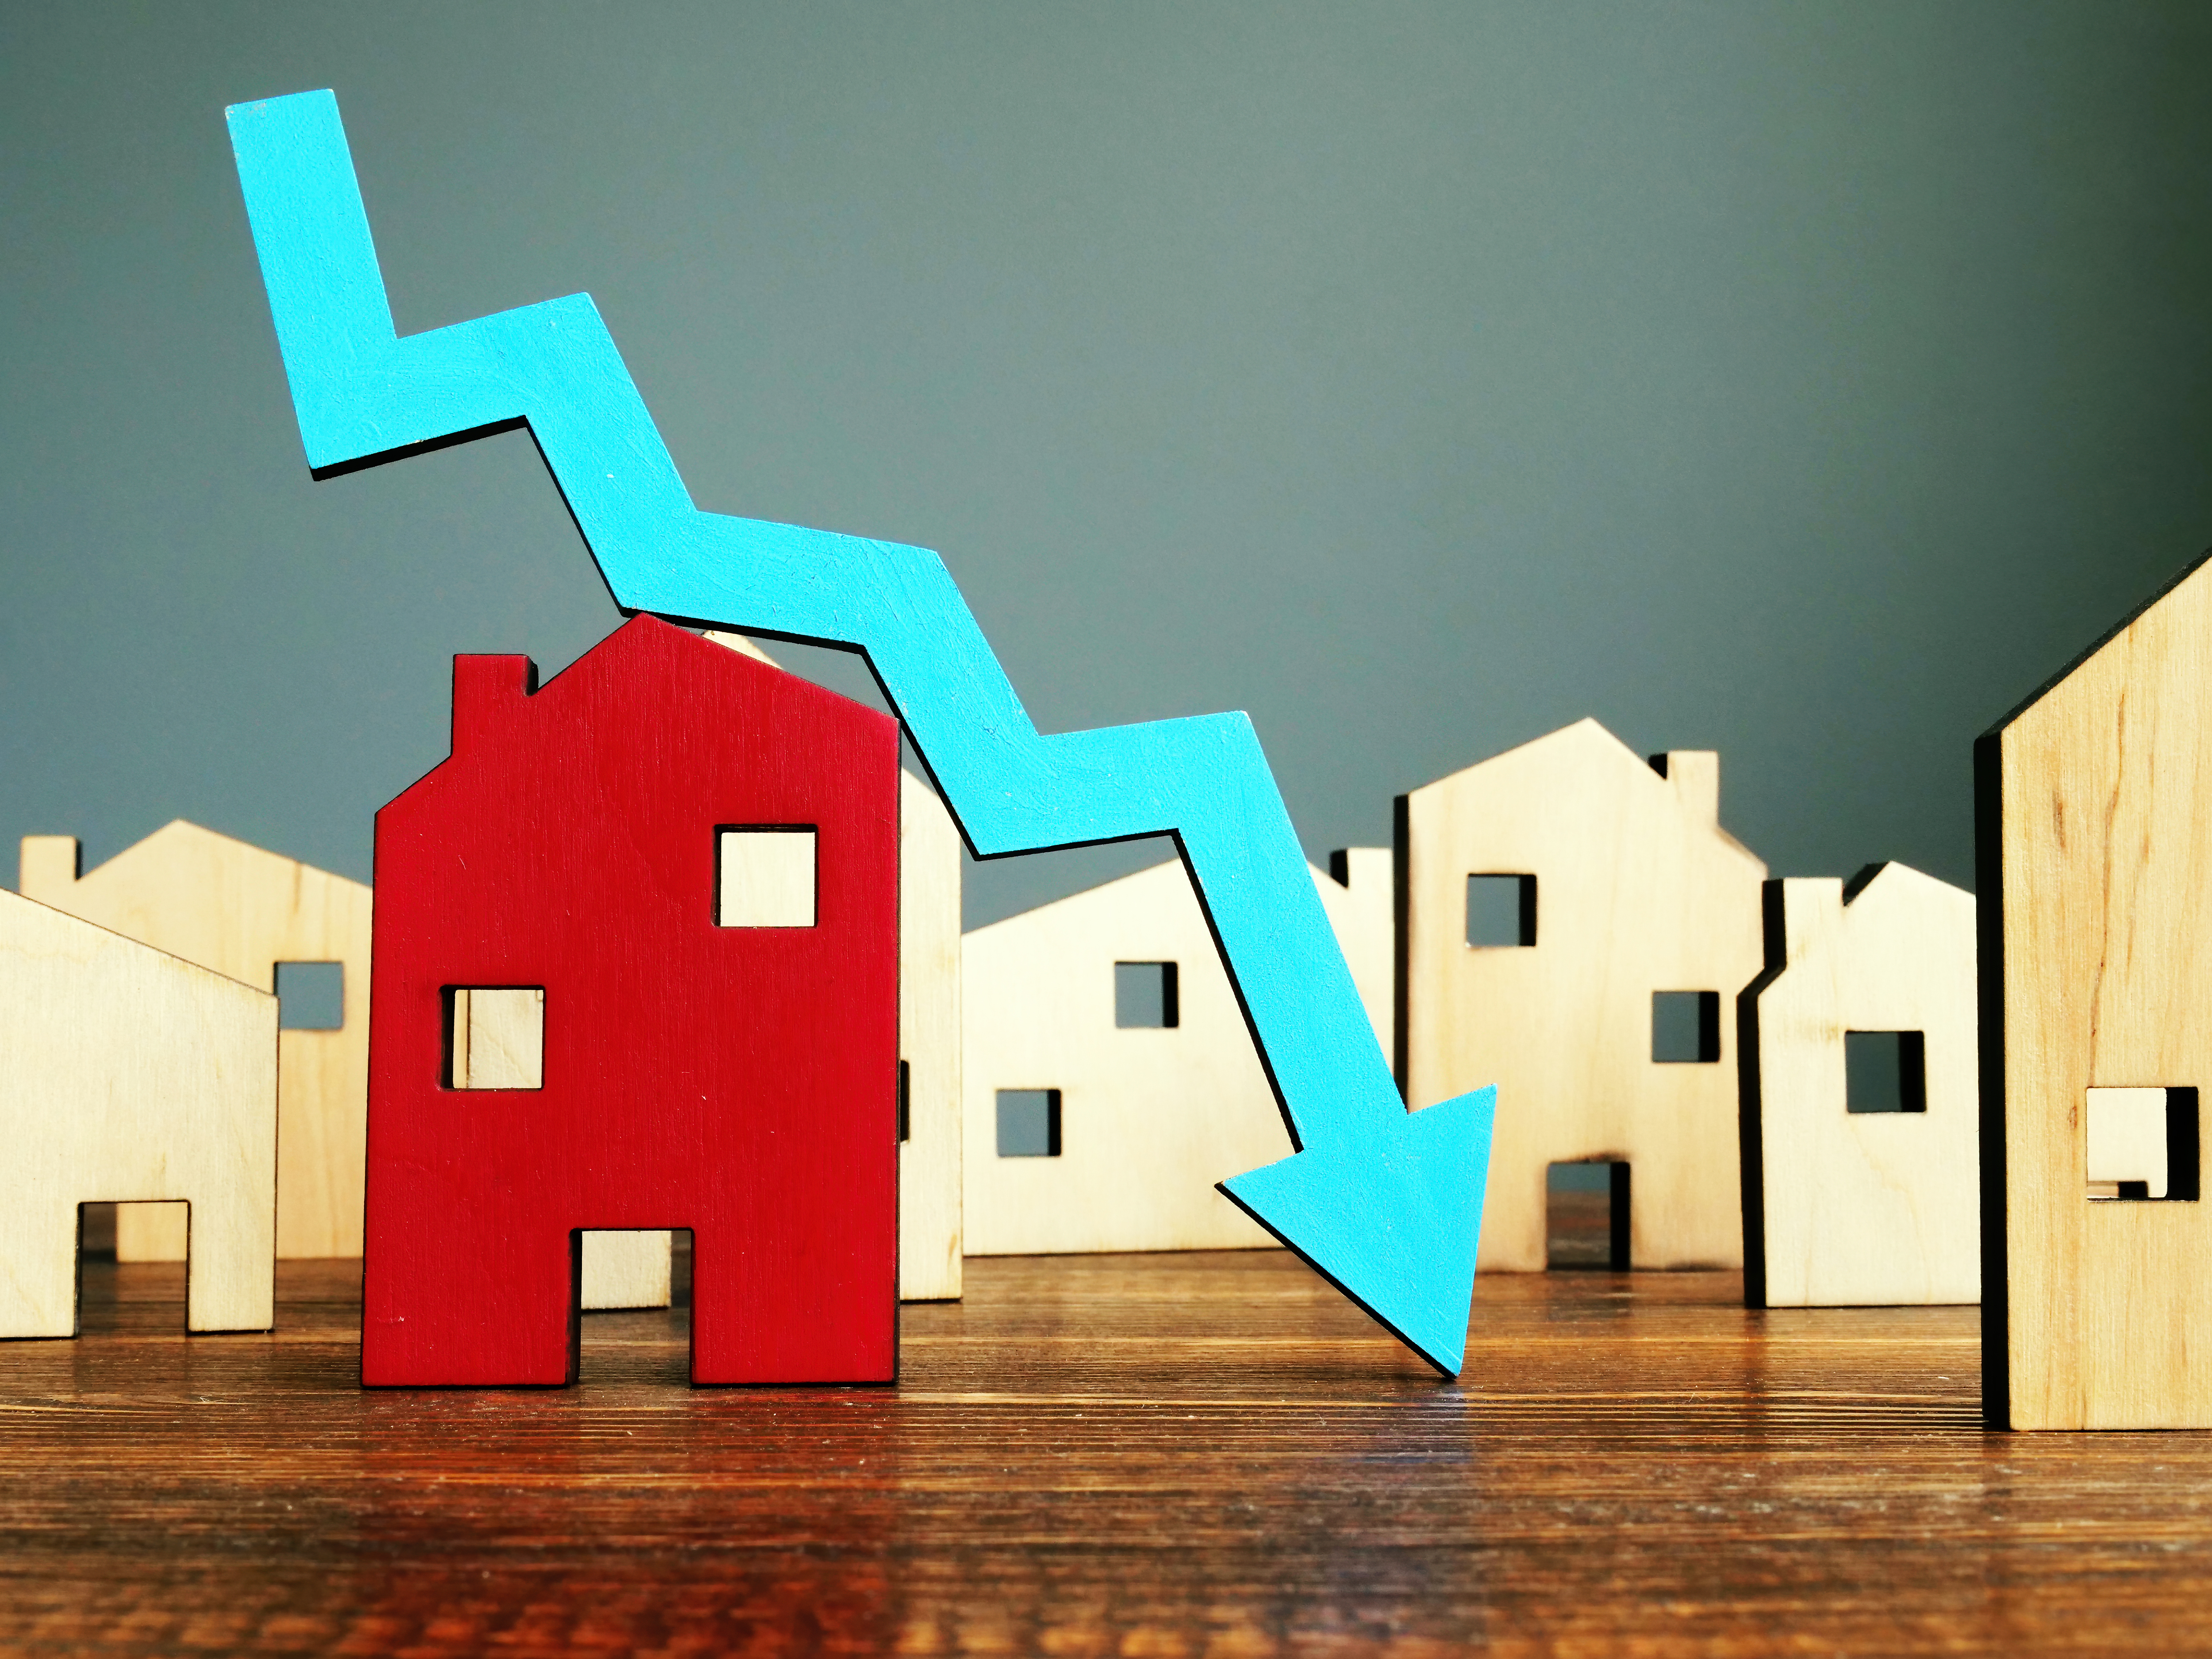 Rent Growth Ends 2022 on the Decline